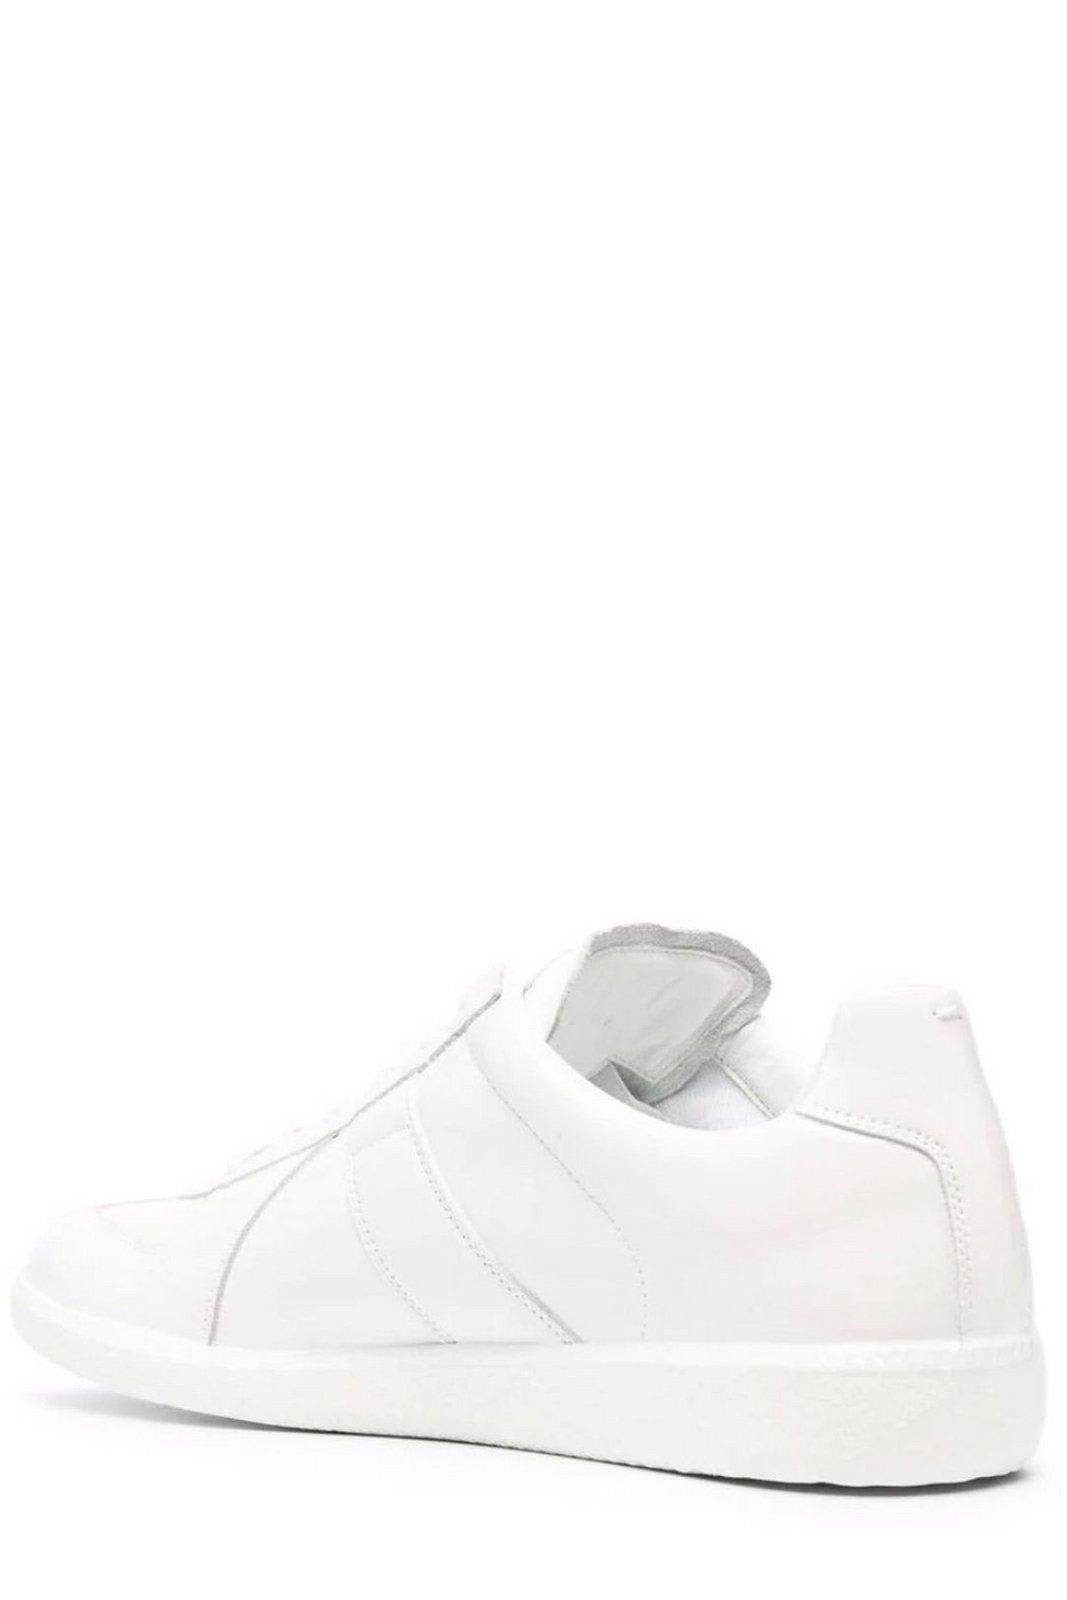 Shop Maison Margiela Replica Lace-up Sneakers In White